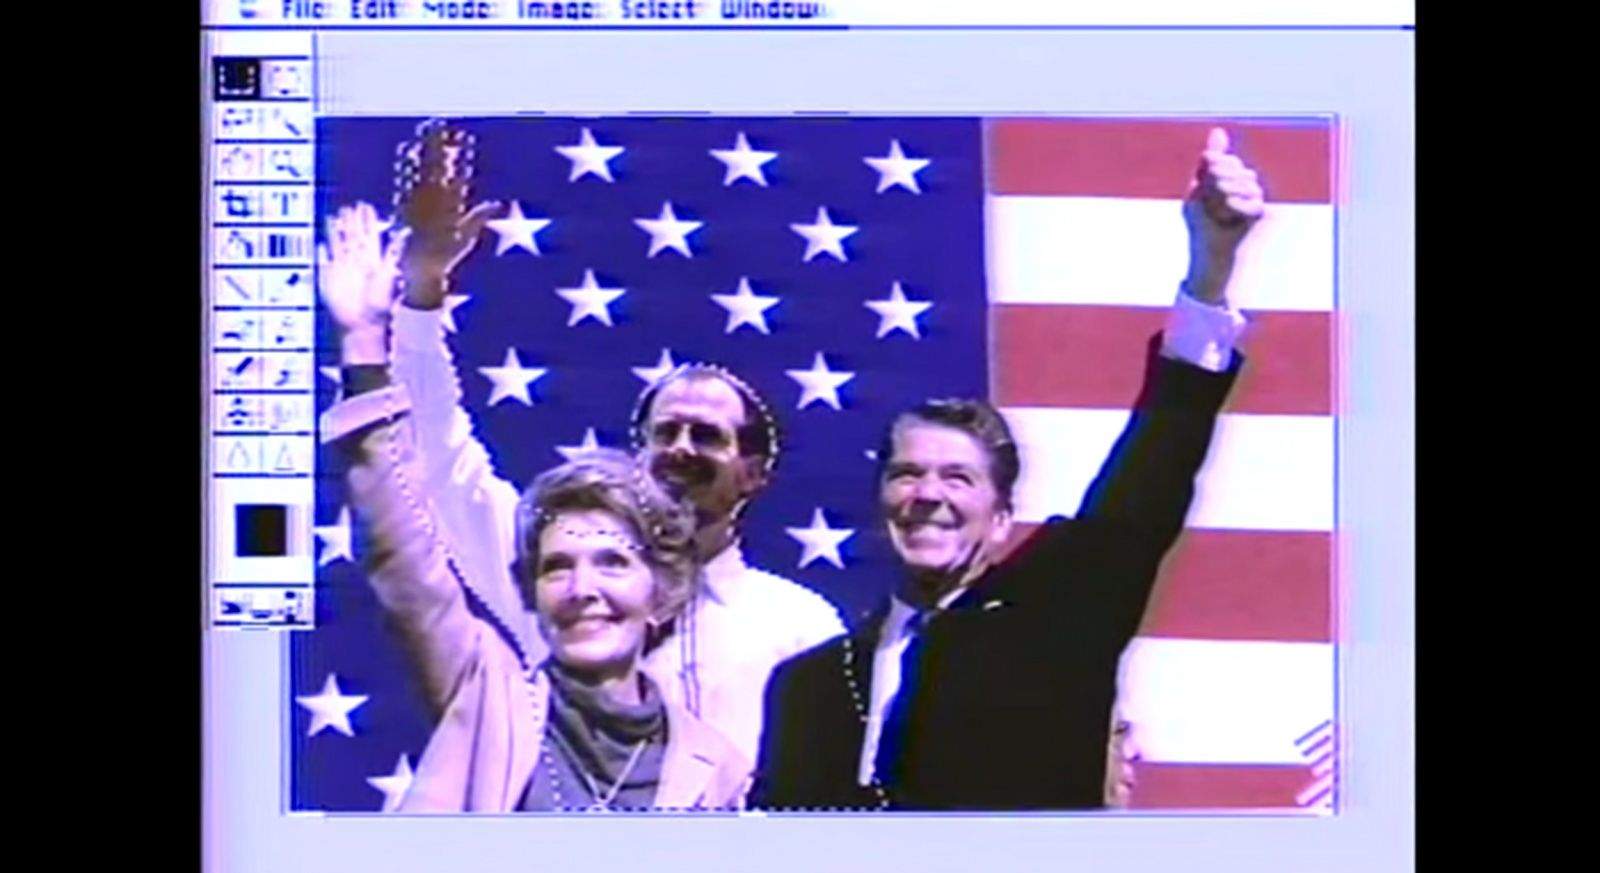 Adobe's Russell Brown, center, placed himself in a photo of the First Couple during a demonstration of Photopshop 1.0 on the Today Show in 1990. Photo: Today Show/YouTube